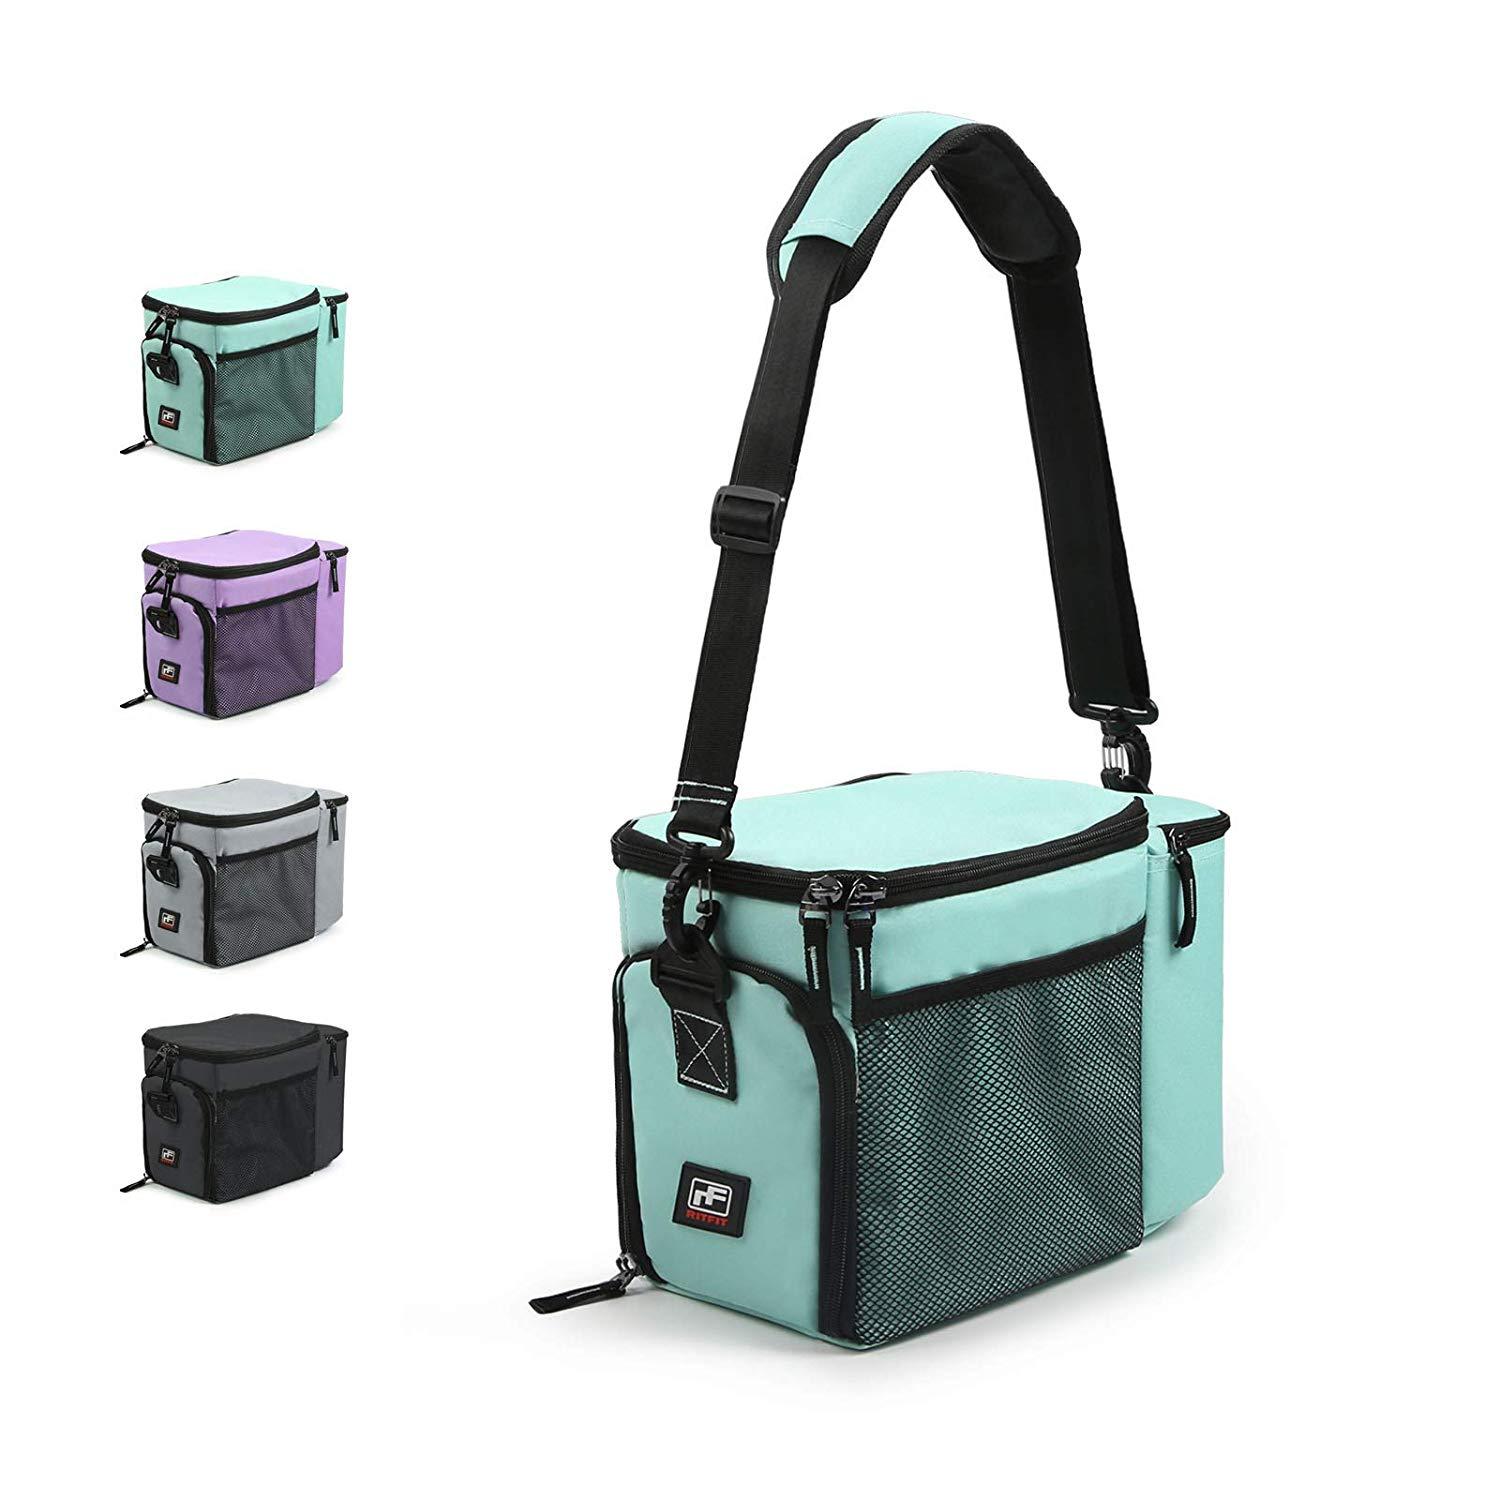  Meal Prep Lunch Bag/Box For Men, Women + 3 Large Food  Containers (45 Oz.) + 2 Big Reusable Ice Packs + Shoulder Strap + Shaker  With Storage. Insulated Lunchbox Cooler Portion